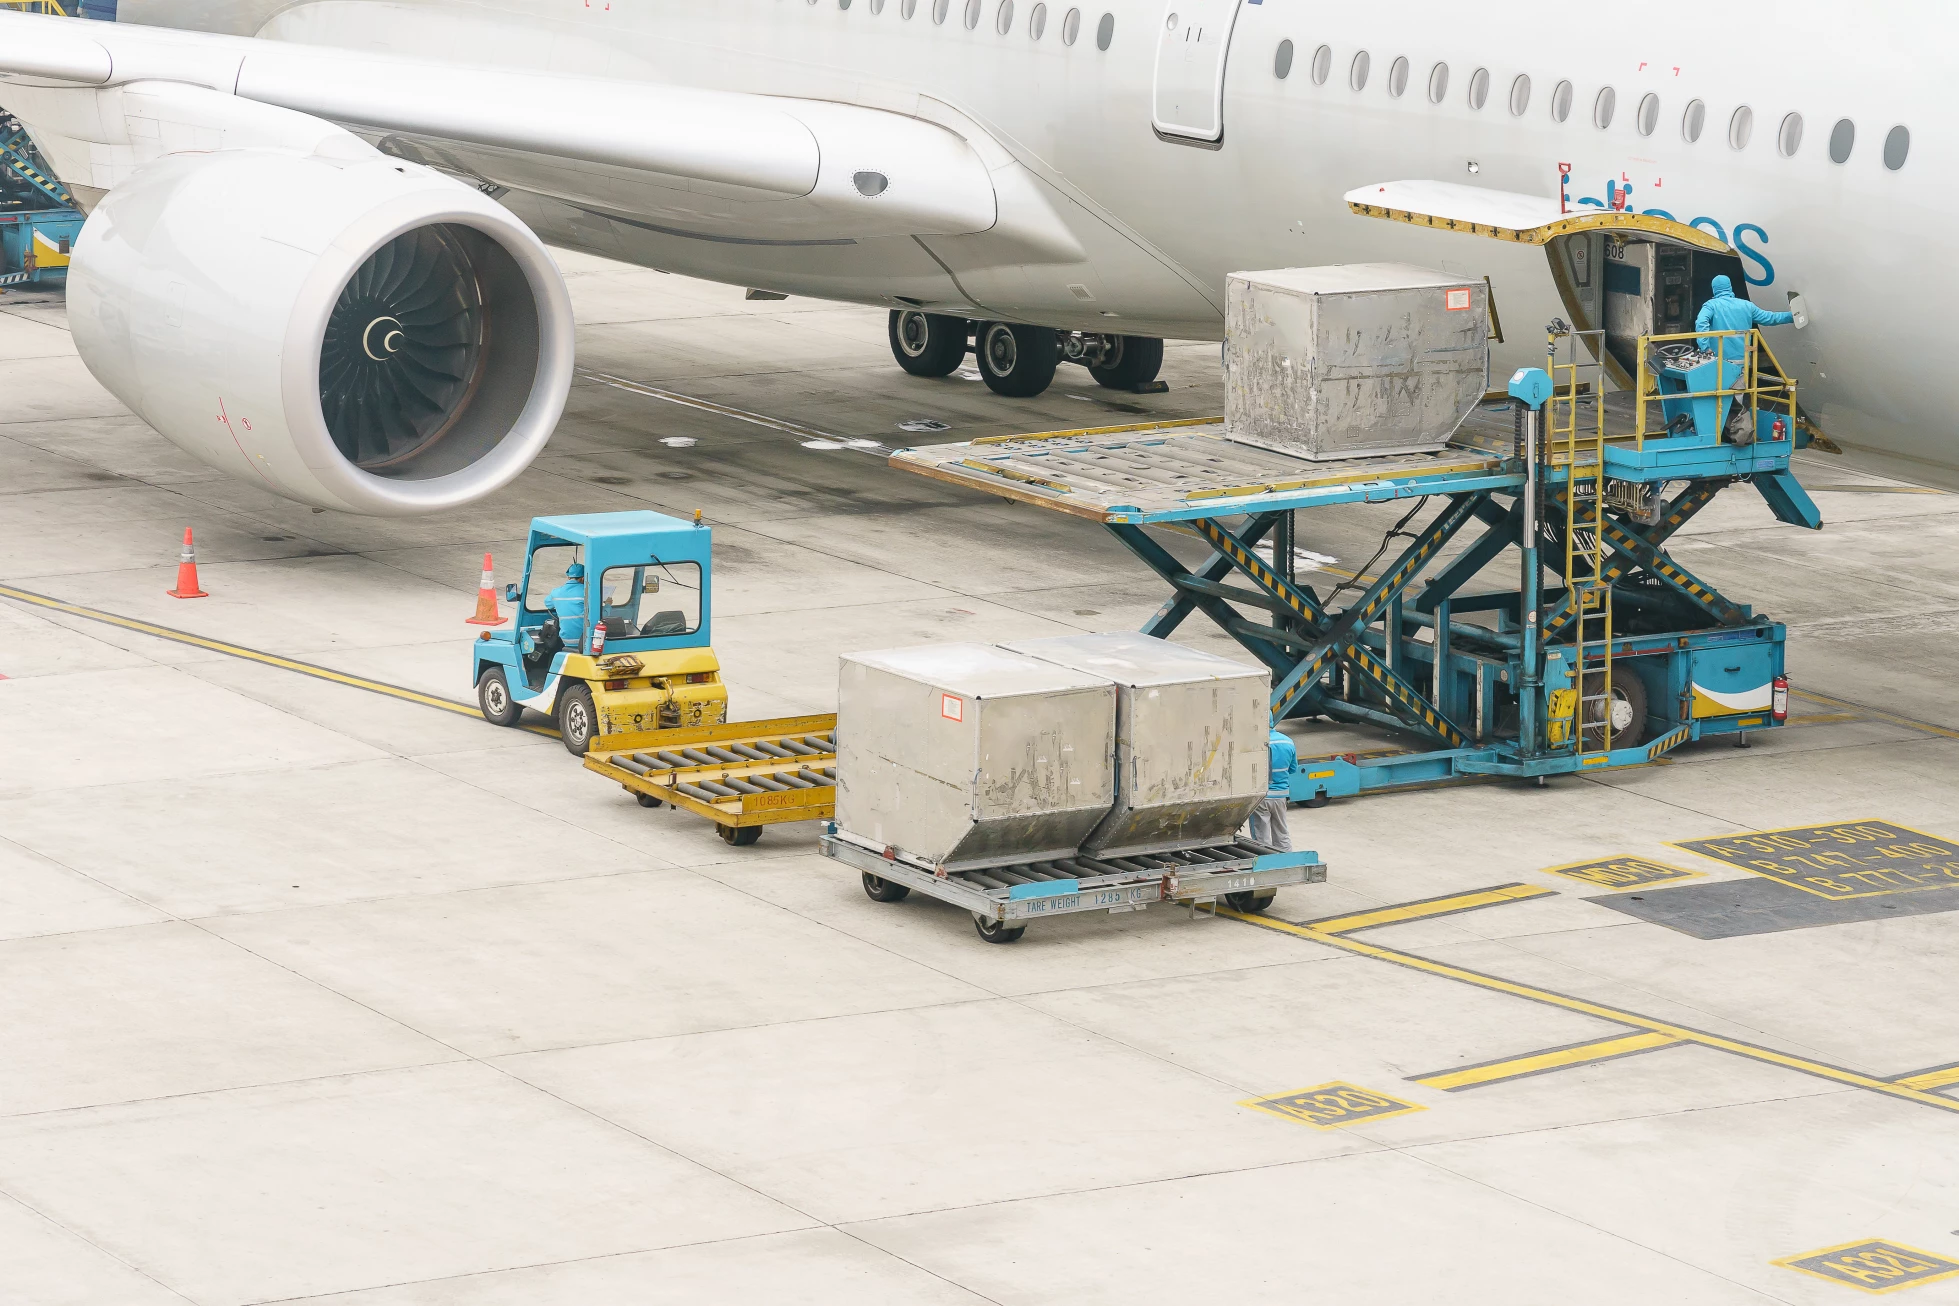 Vietnam’s Air Freight Industry Shows Strong Potential Despite Pandemic